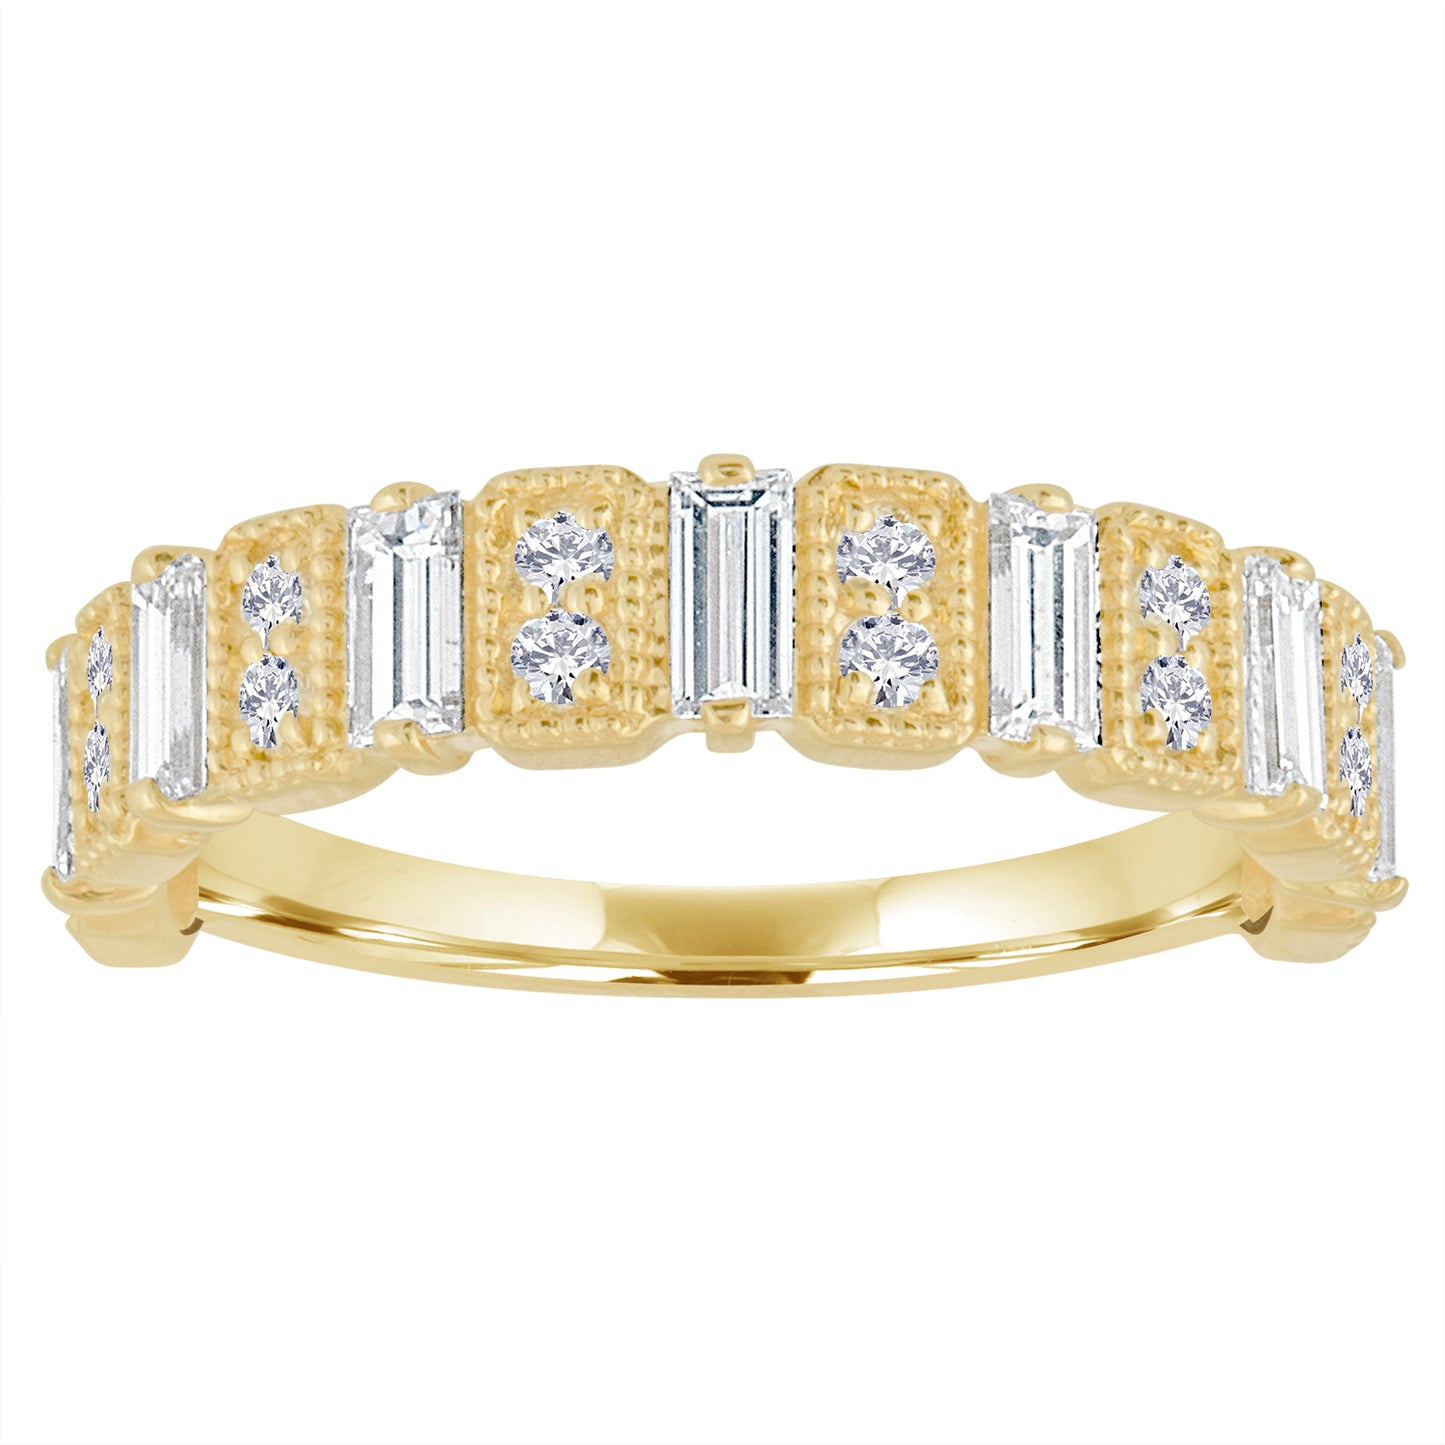 Yellow gold wide band with diamond baguettes and round diamonds.